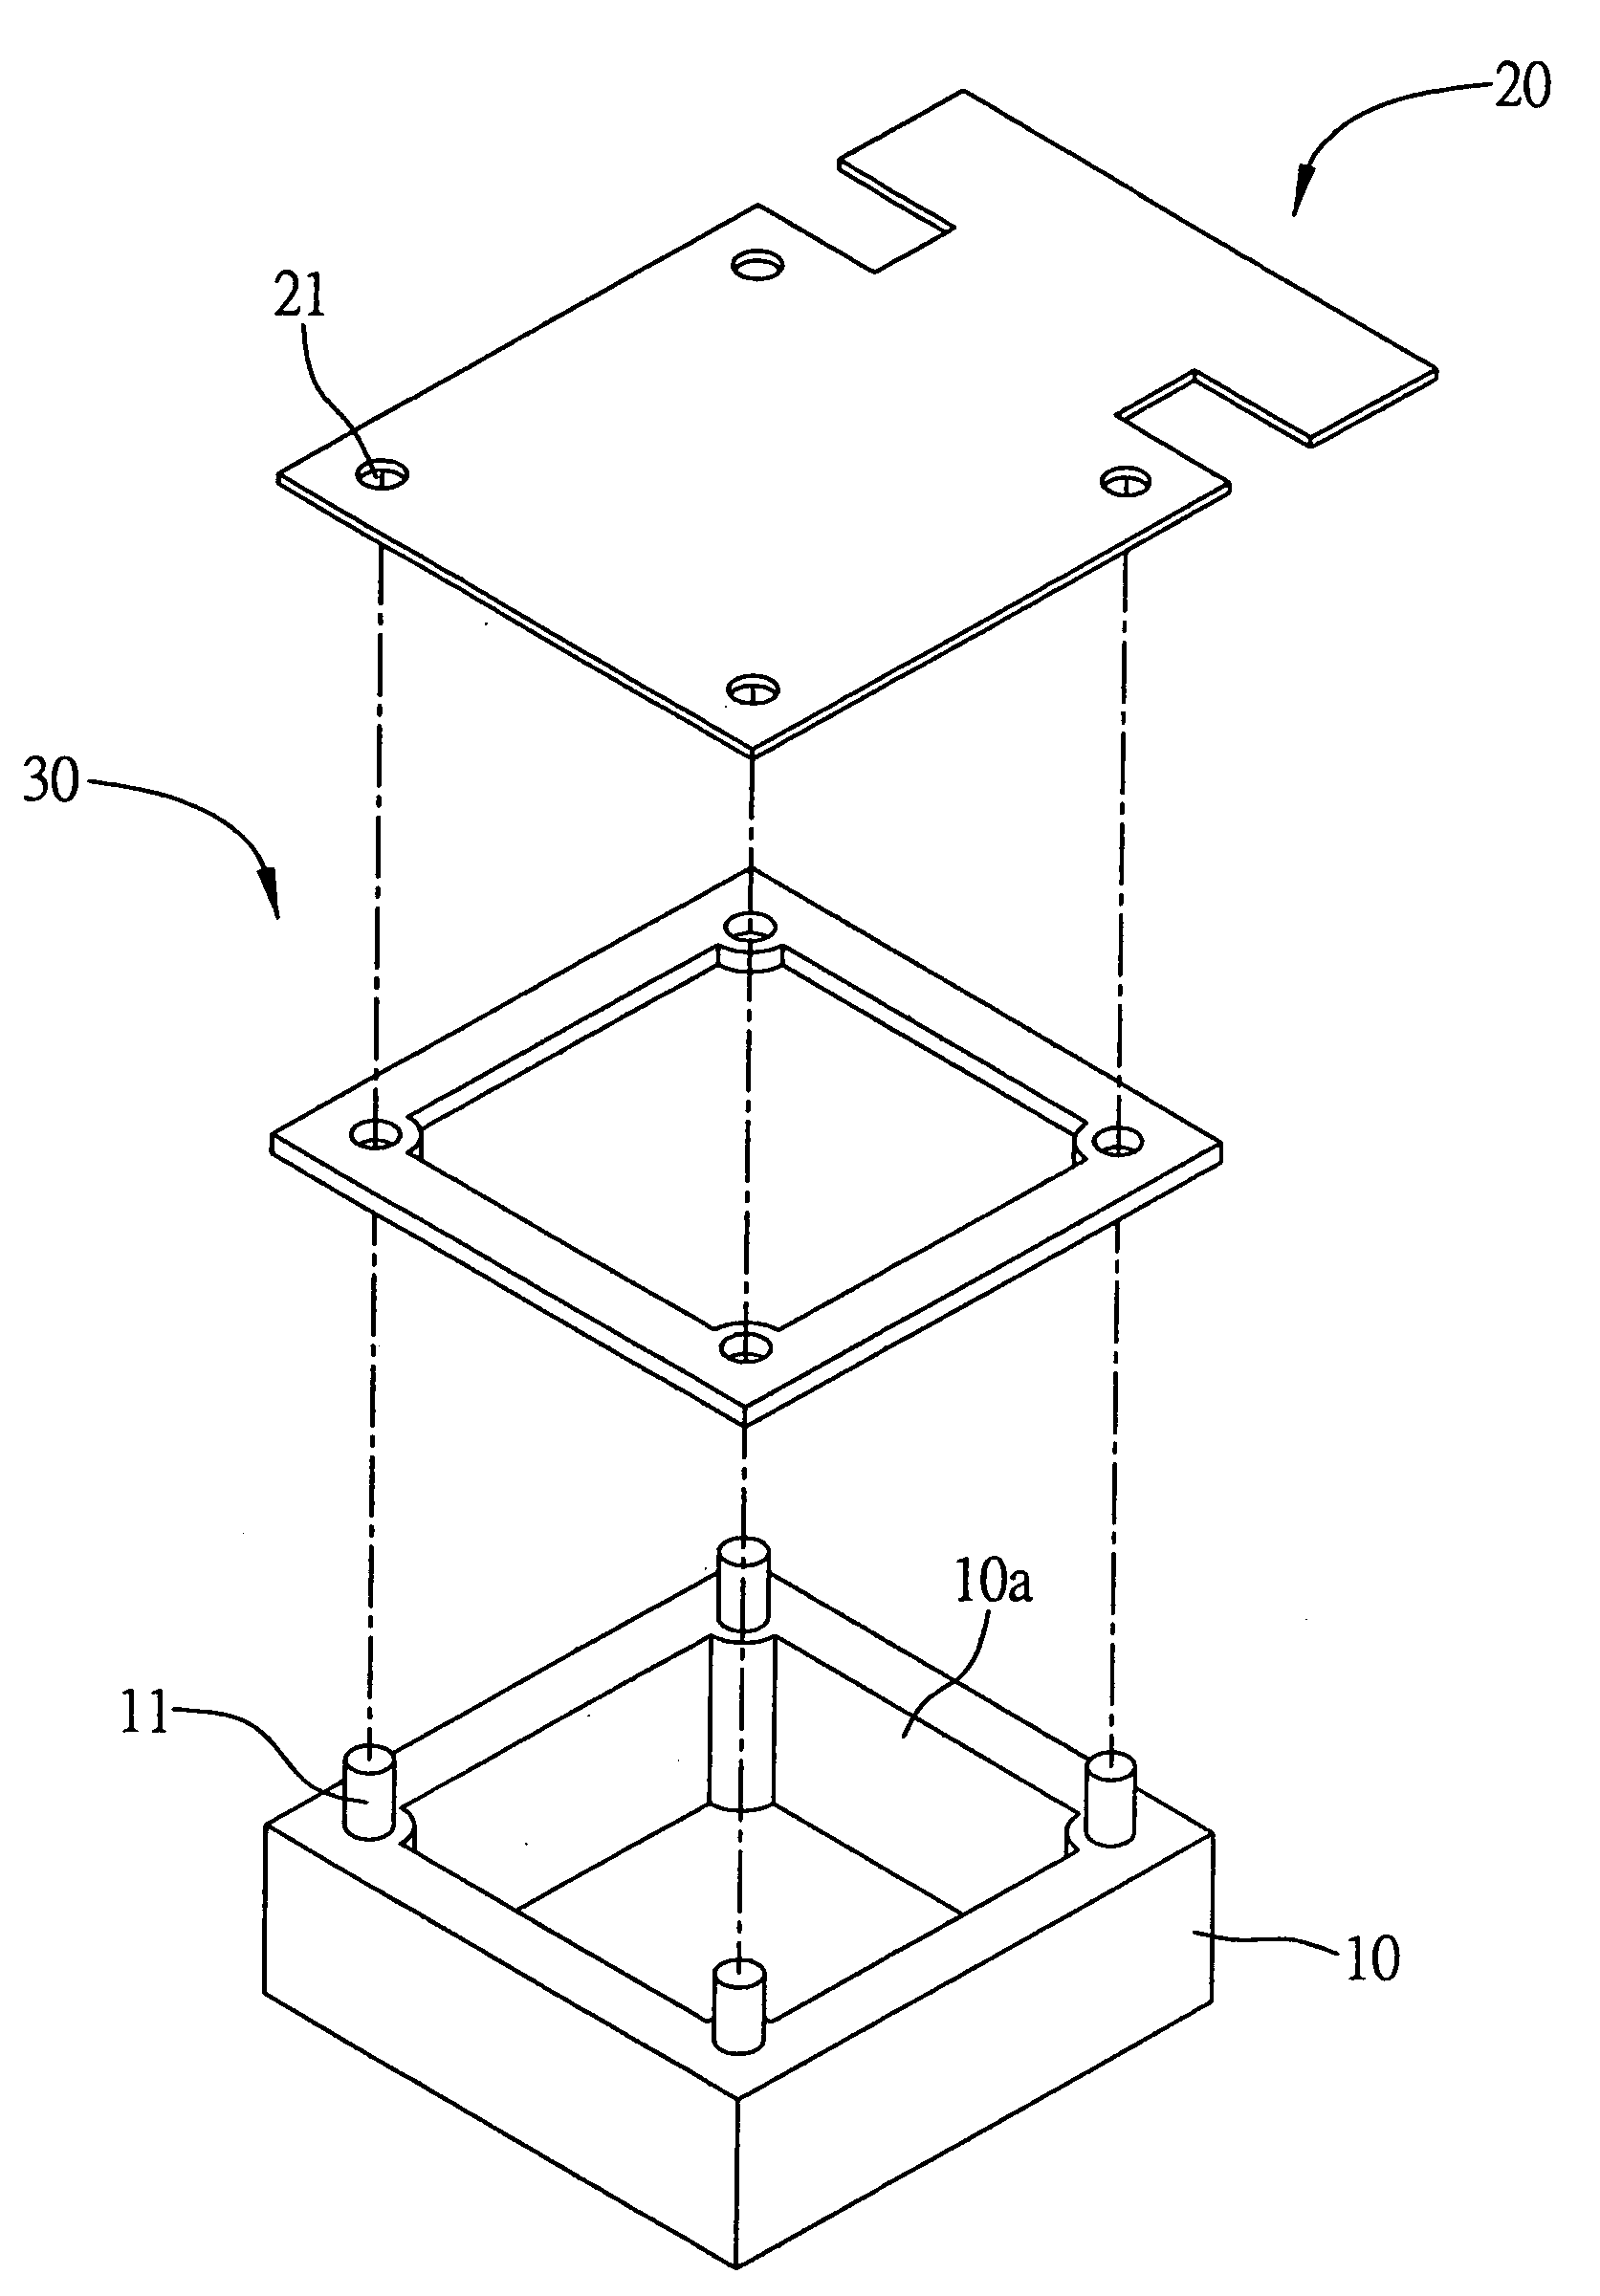 Digital image capturing module assembly and method of fabricating the same